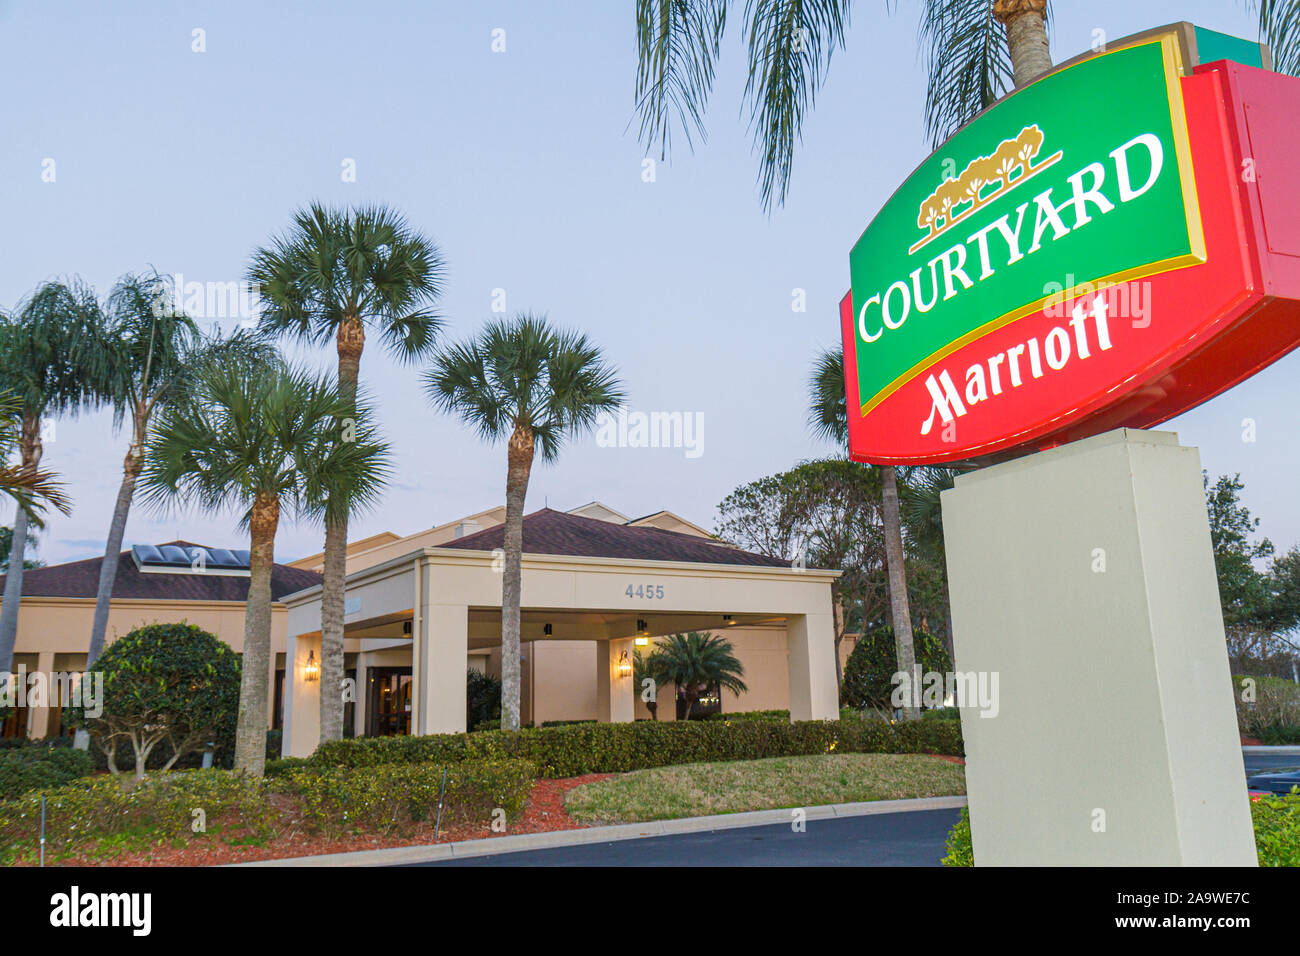 Fort Ft. Myers Florida,Courtyard by Marriott,hotel,sign,FL100322076 Stock Photo